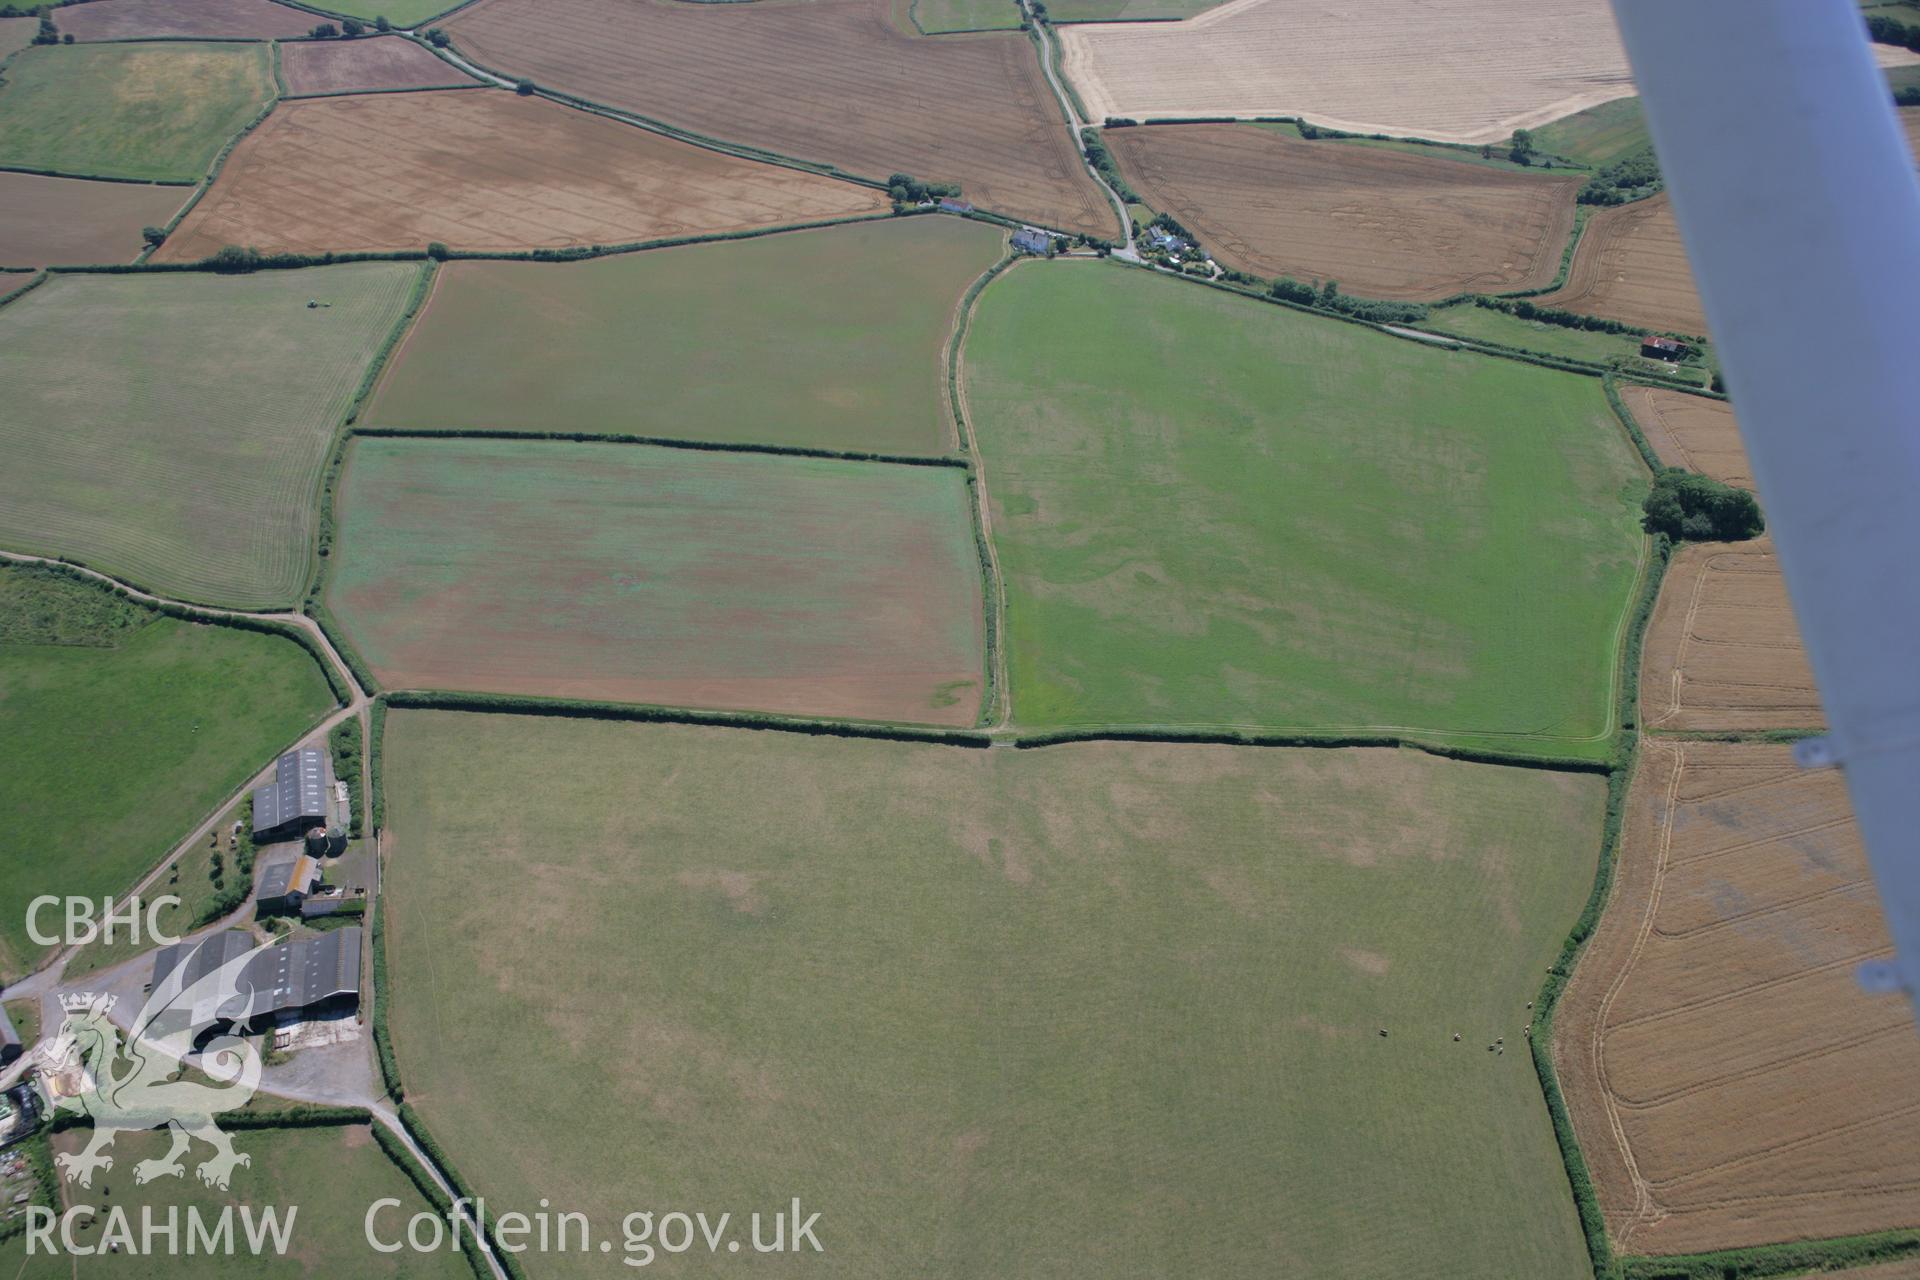 RCAHMW colour oblique aerial photograph of Corntown Enclosure. Taken on 24 July 2006 by Toby Driver.